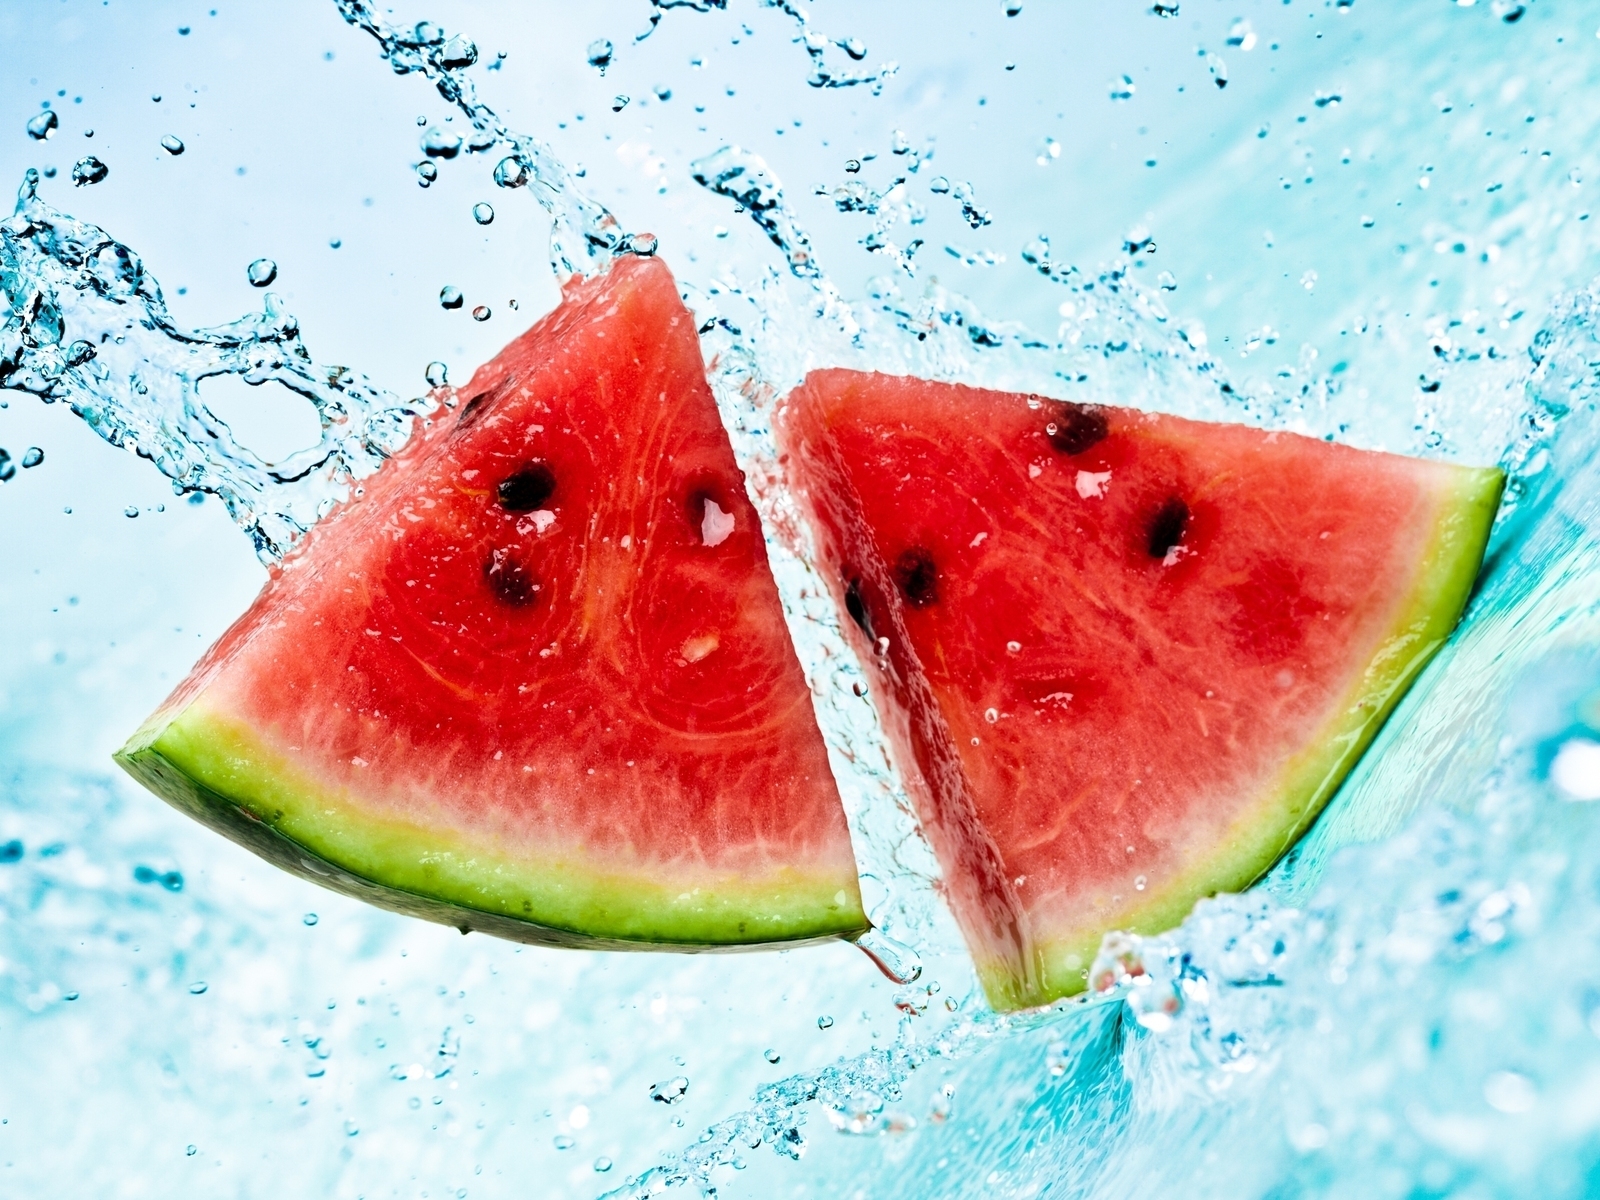 Watermelon Slices for 1600 x 1200 resolution